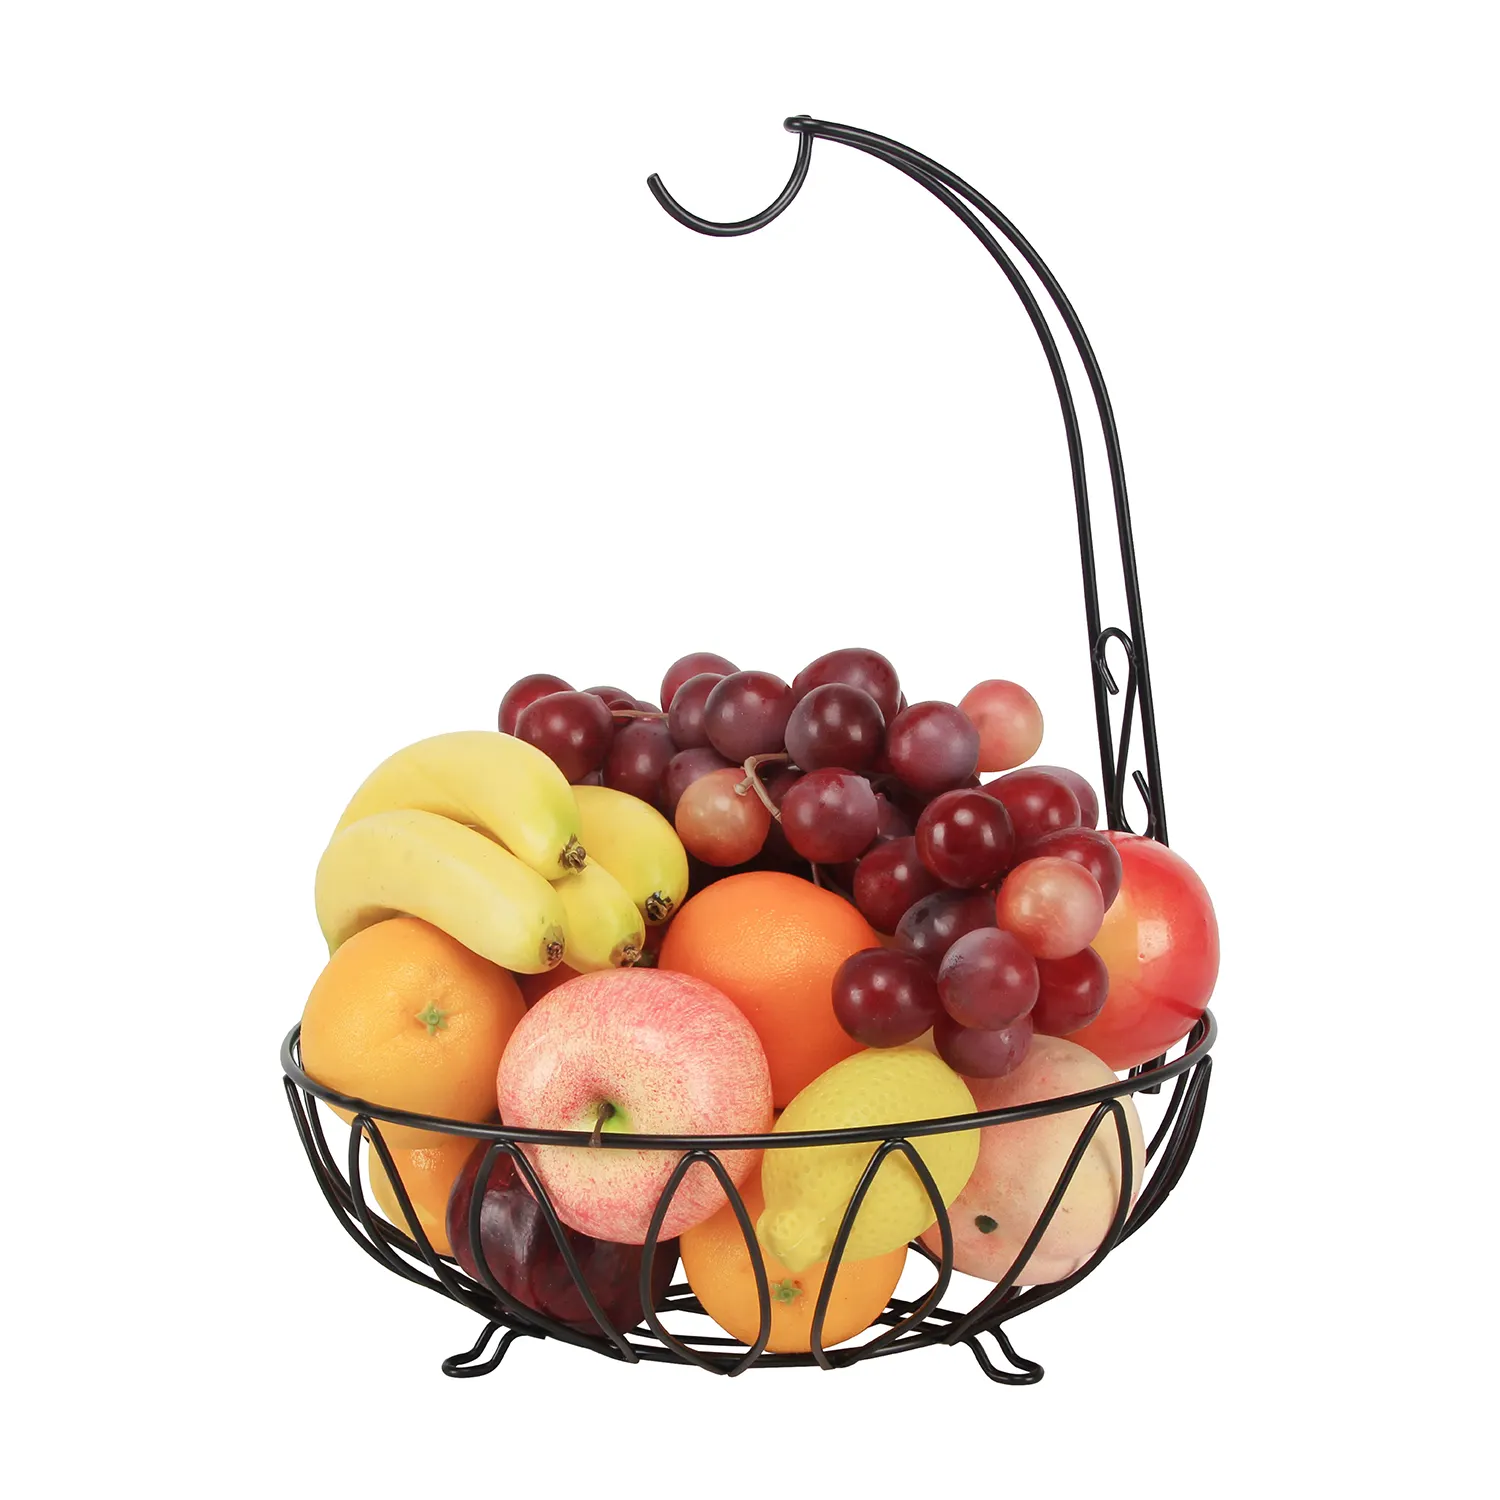 New Eco-Friendly Iron Wire Banana Hanger Stand Fashionable Flexible Fruit Basket Holder for Kitchen Use Hand Woven Metal Wire